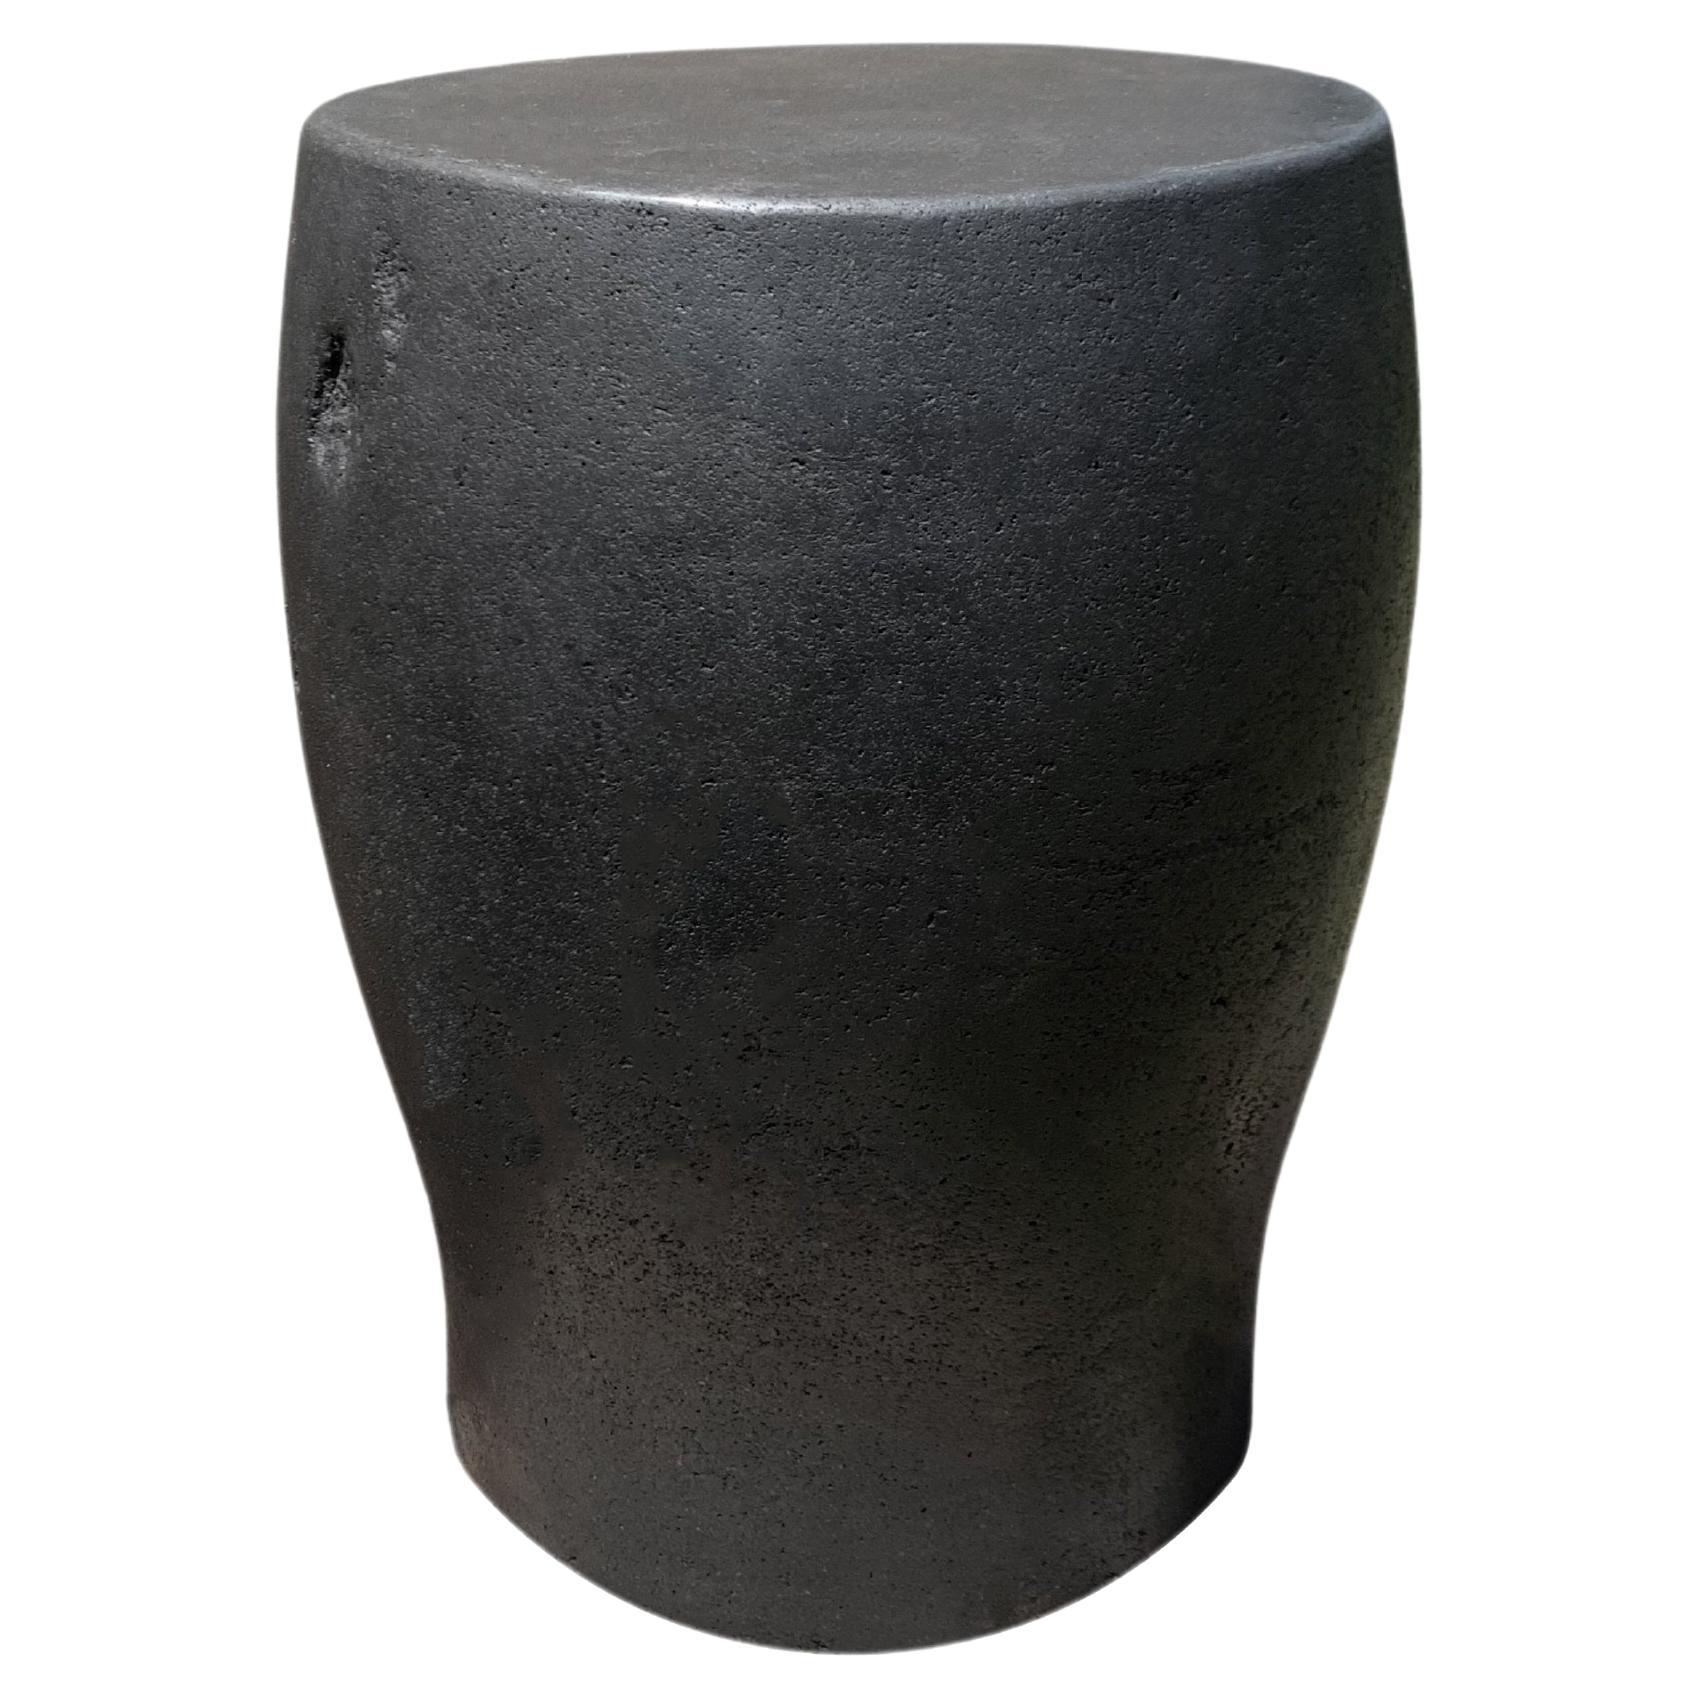 Solid Stone Side Table / Pedestal from Java, Indonesia, C. 1950